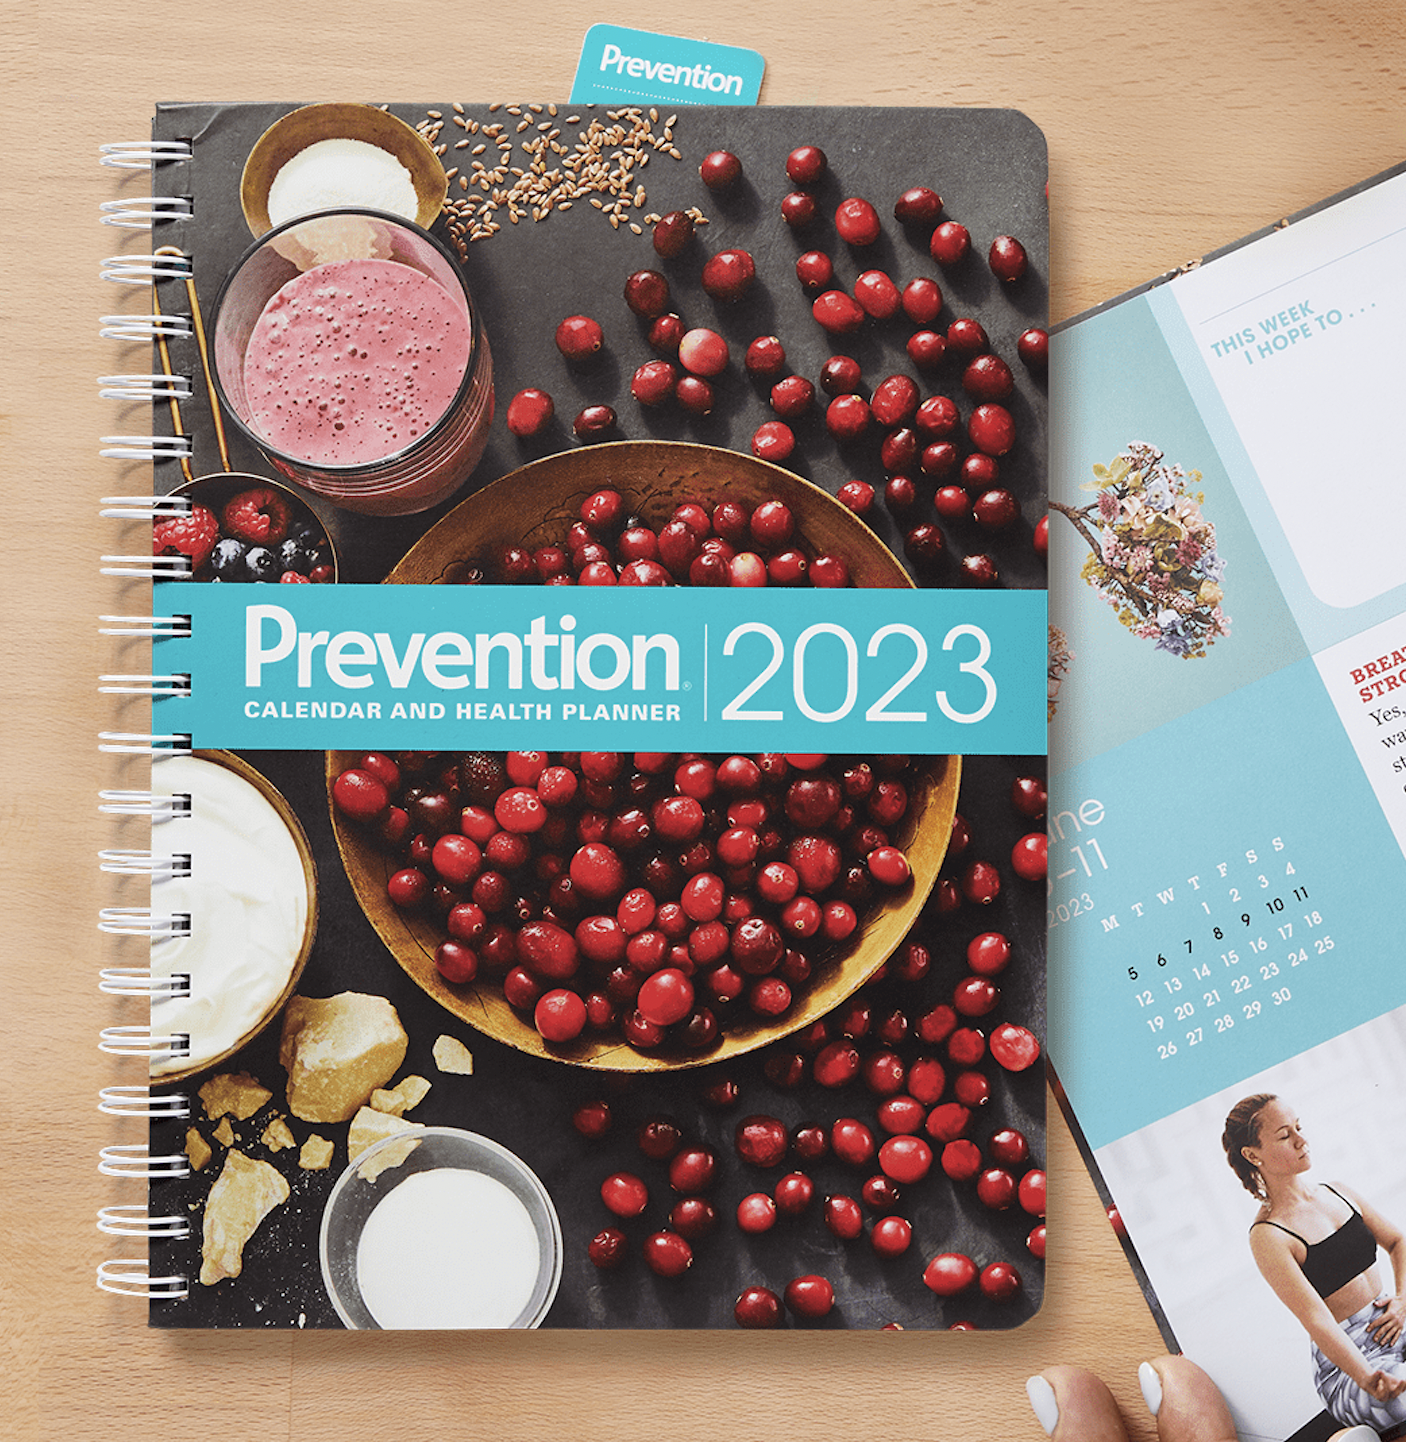 2023 Prevention Calendar and Health Planner